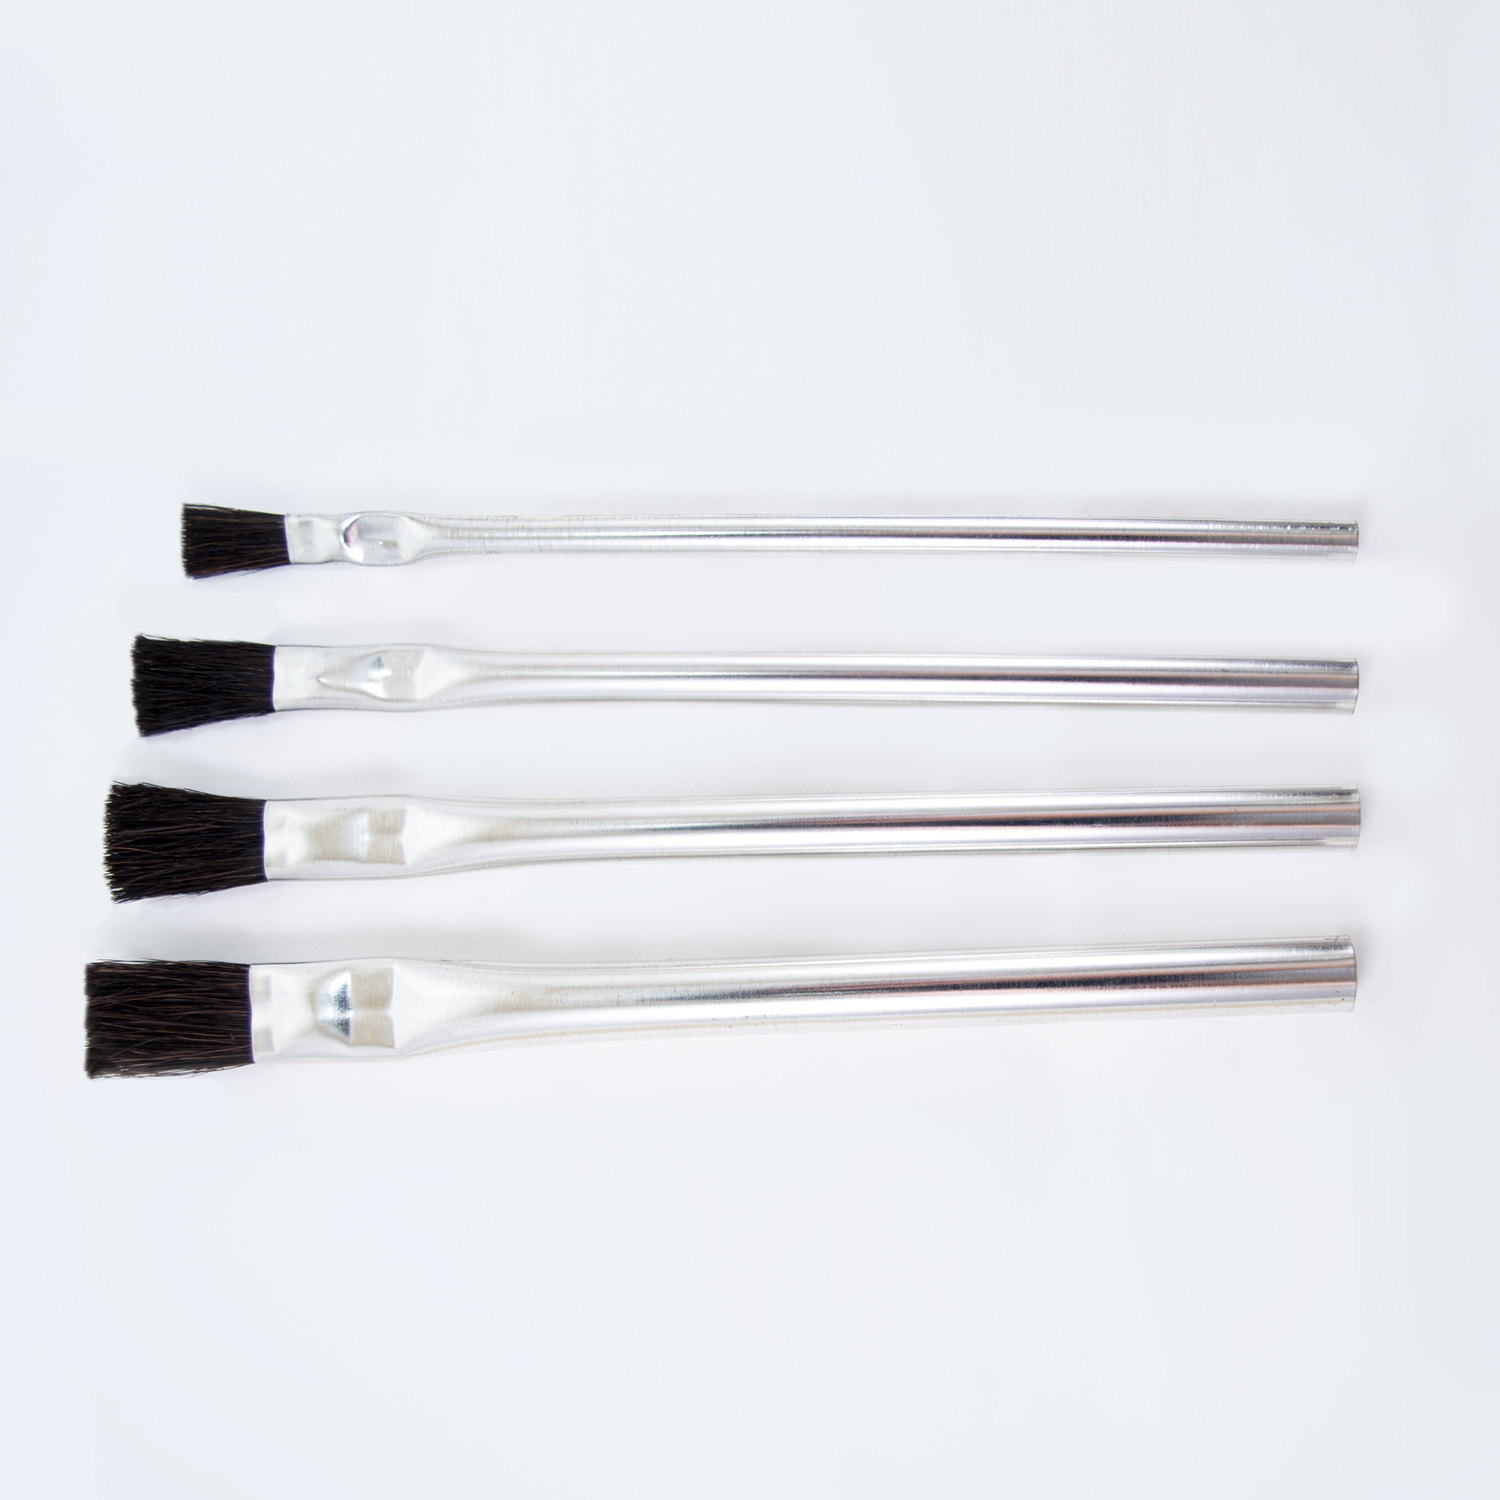 HDX Acid Brushes (3-Piece) 80-721-111 - The Home Depot